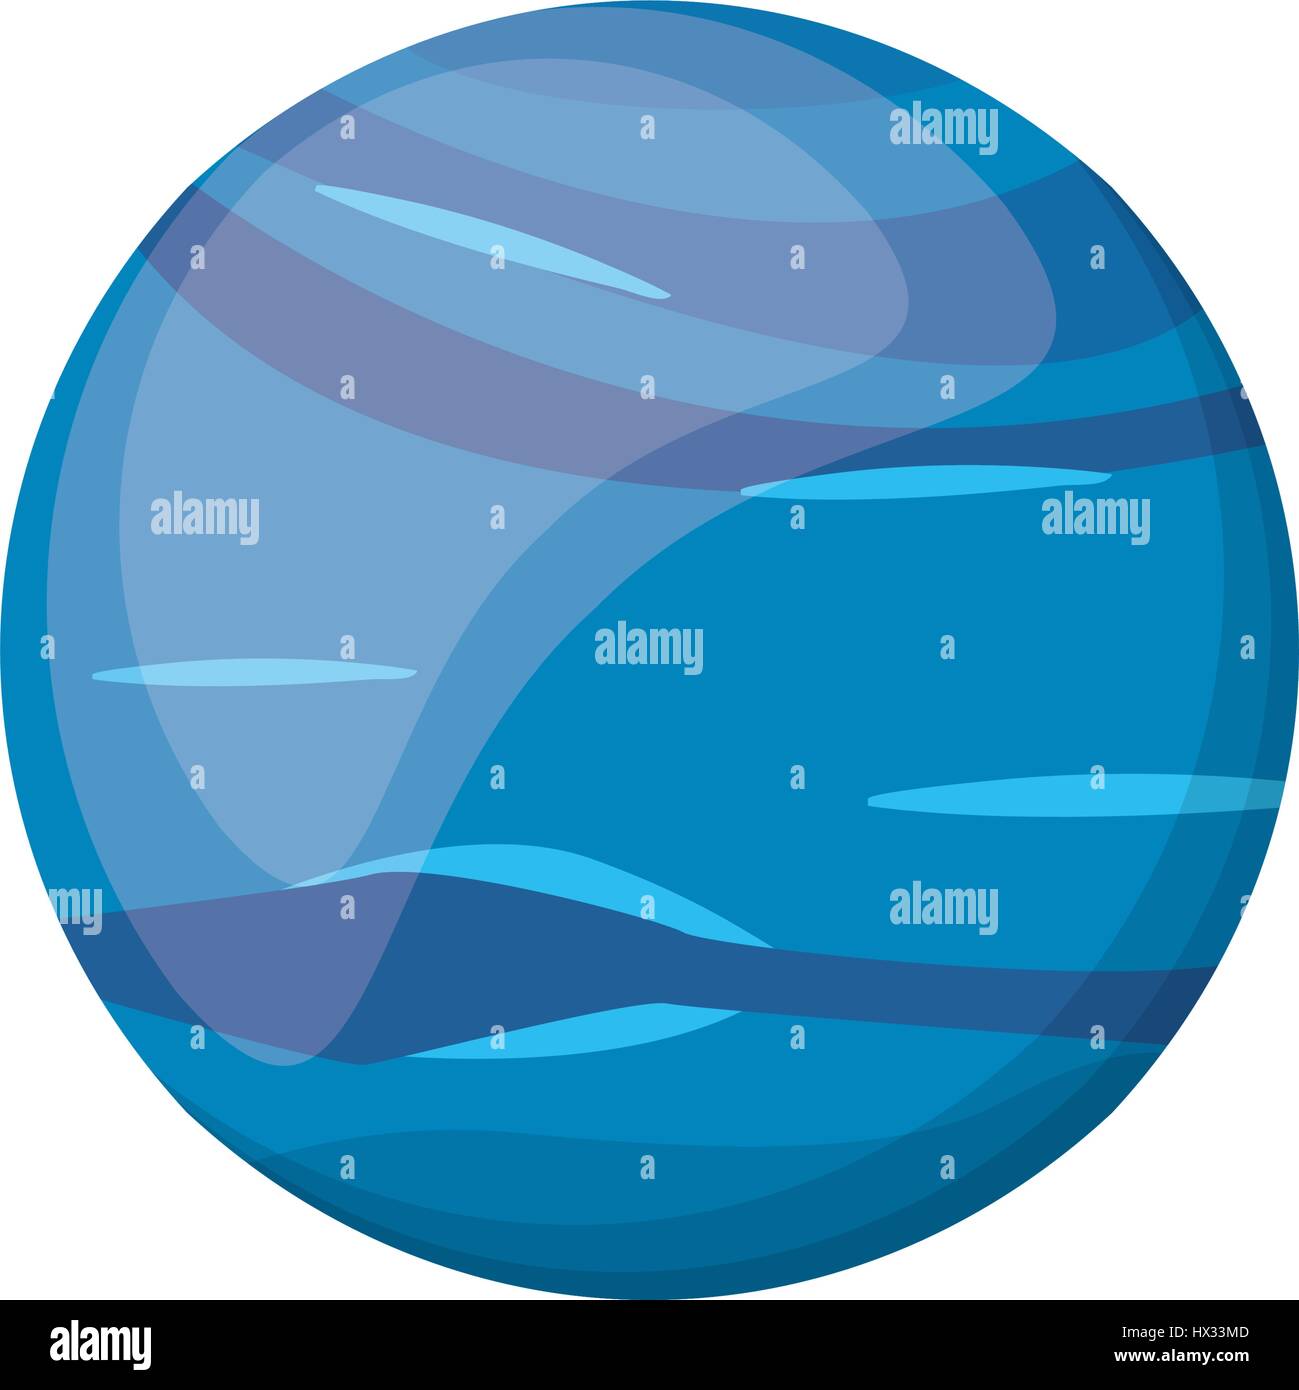 neptune planet space image Stock Vector